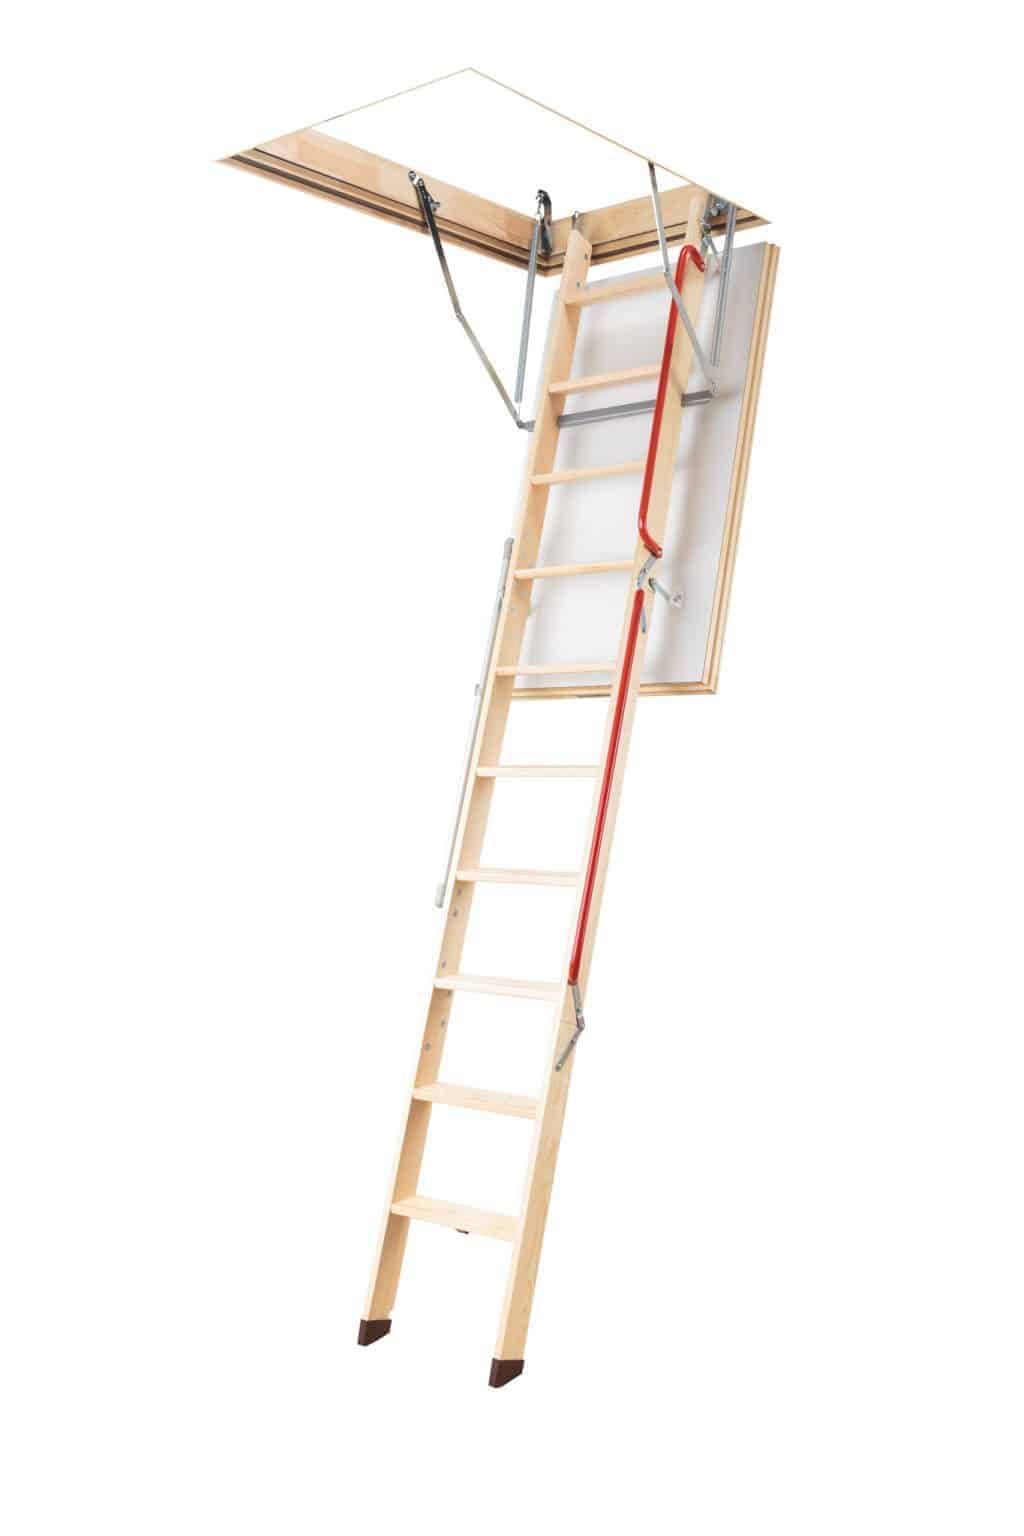 Fakro LWL Extra Timber Attic Ladder KASW74 Timber Ladders, Ultimate Series Kimberley